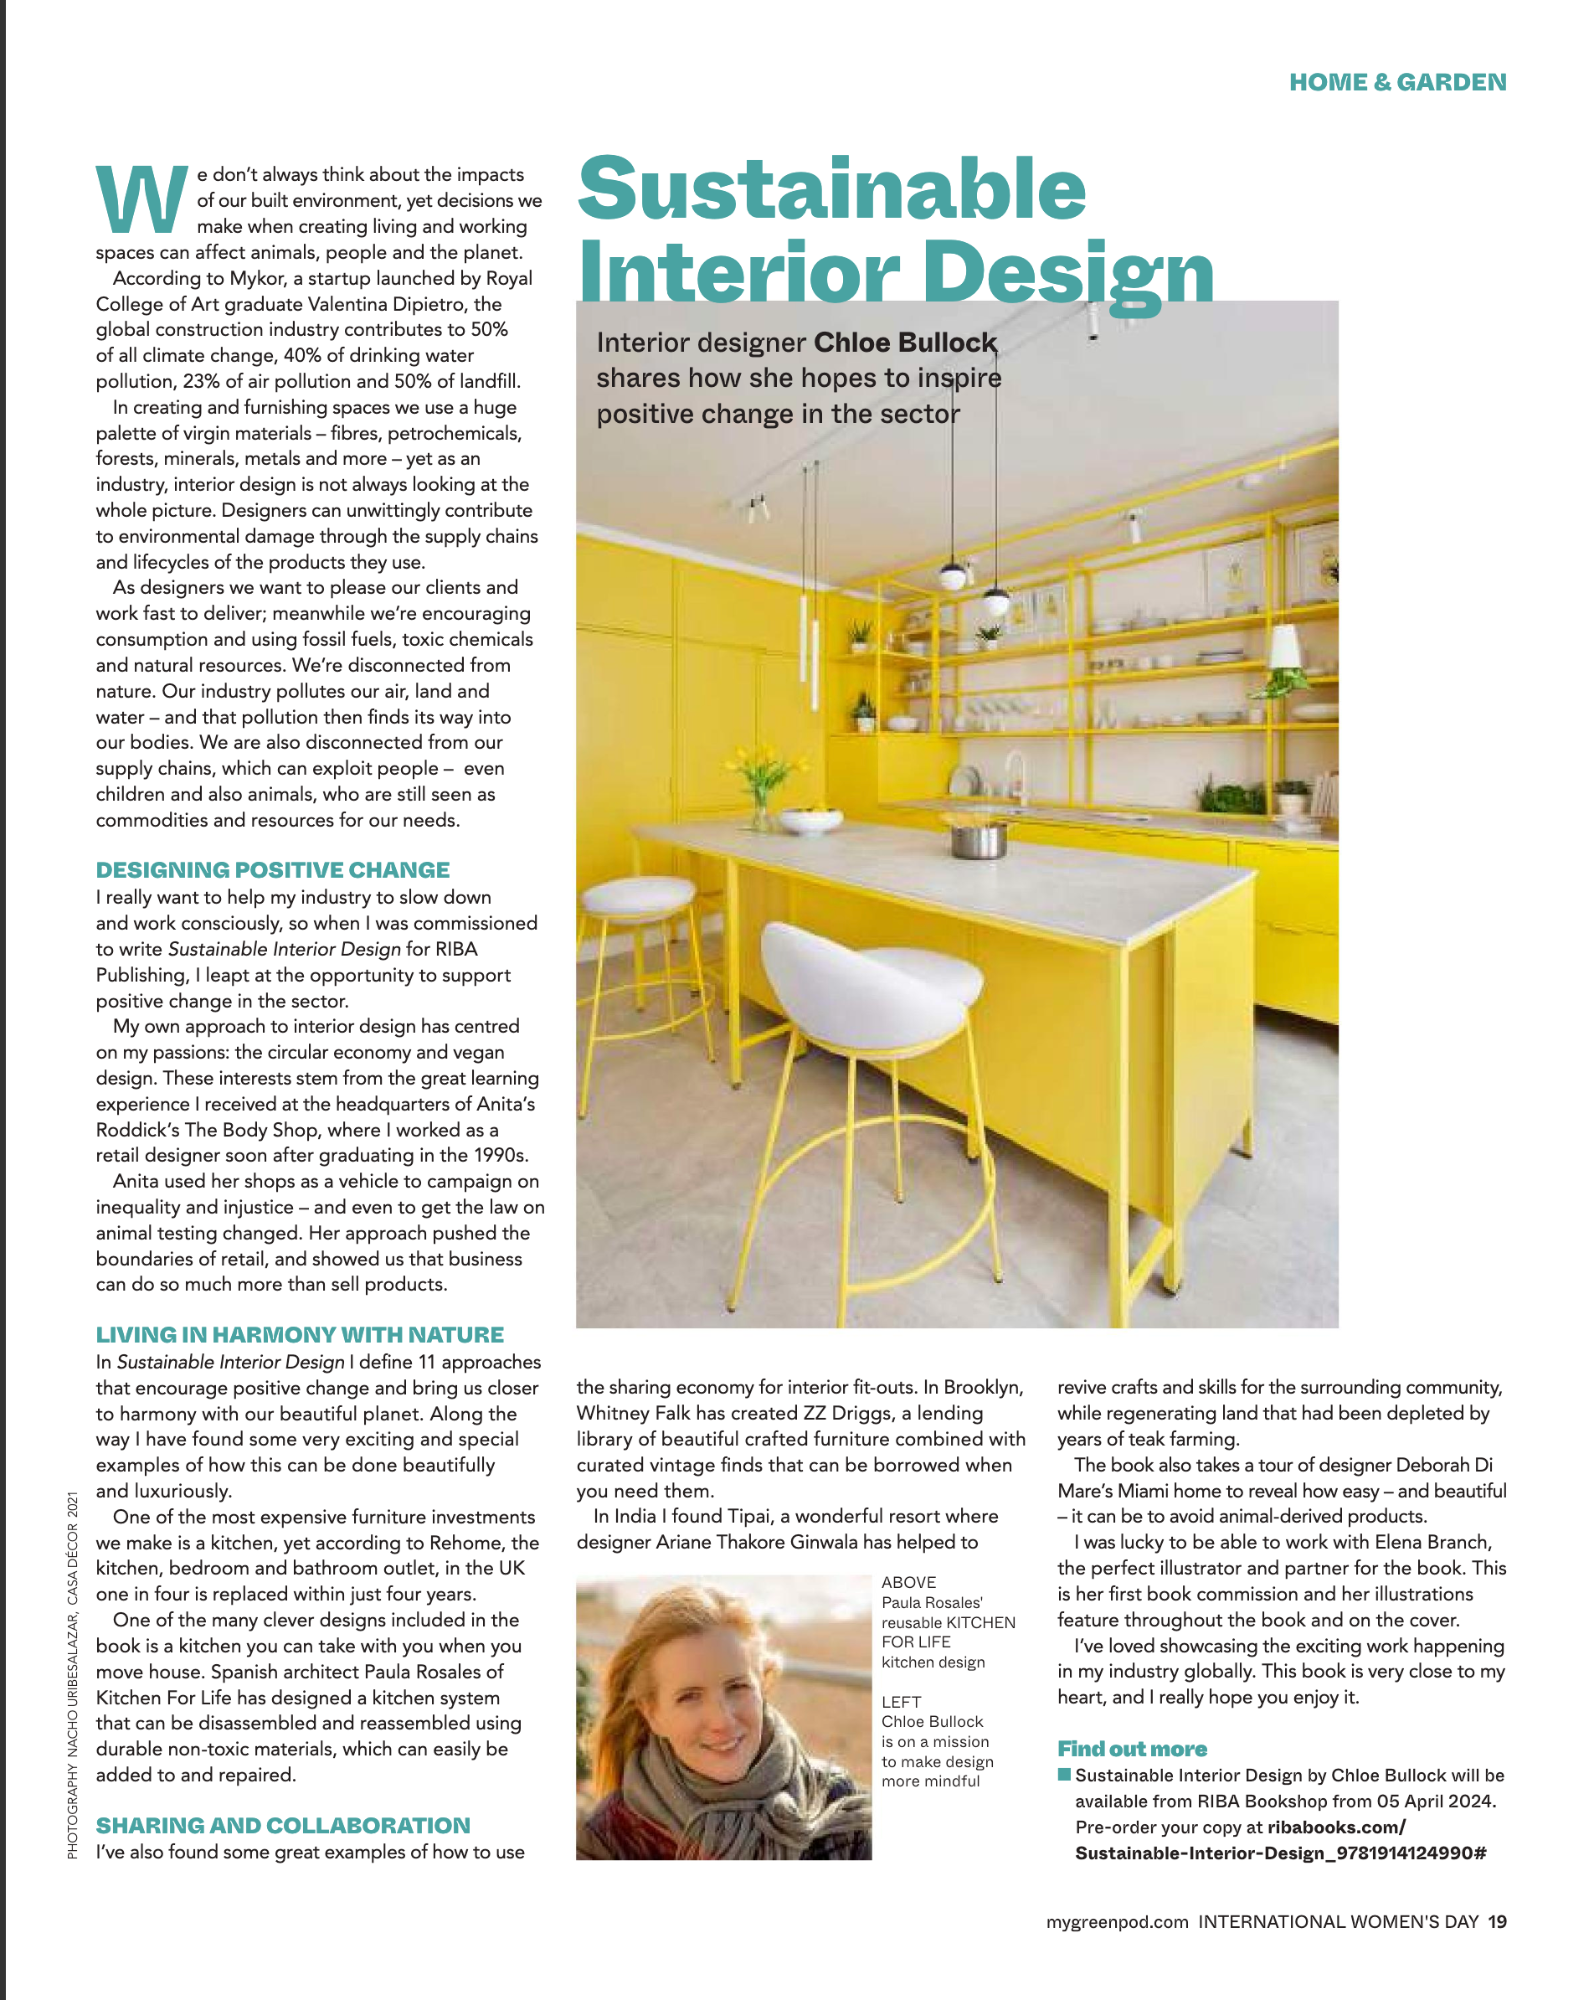 Article on sustainable Interior design